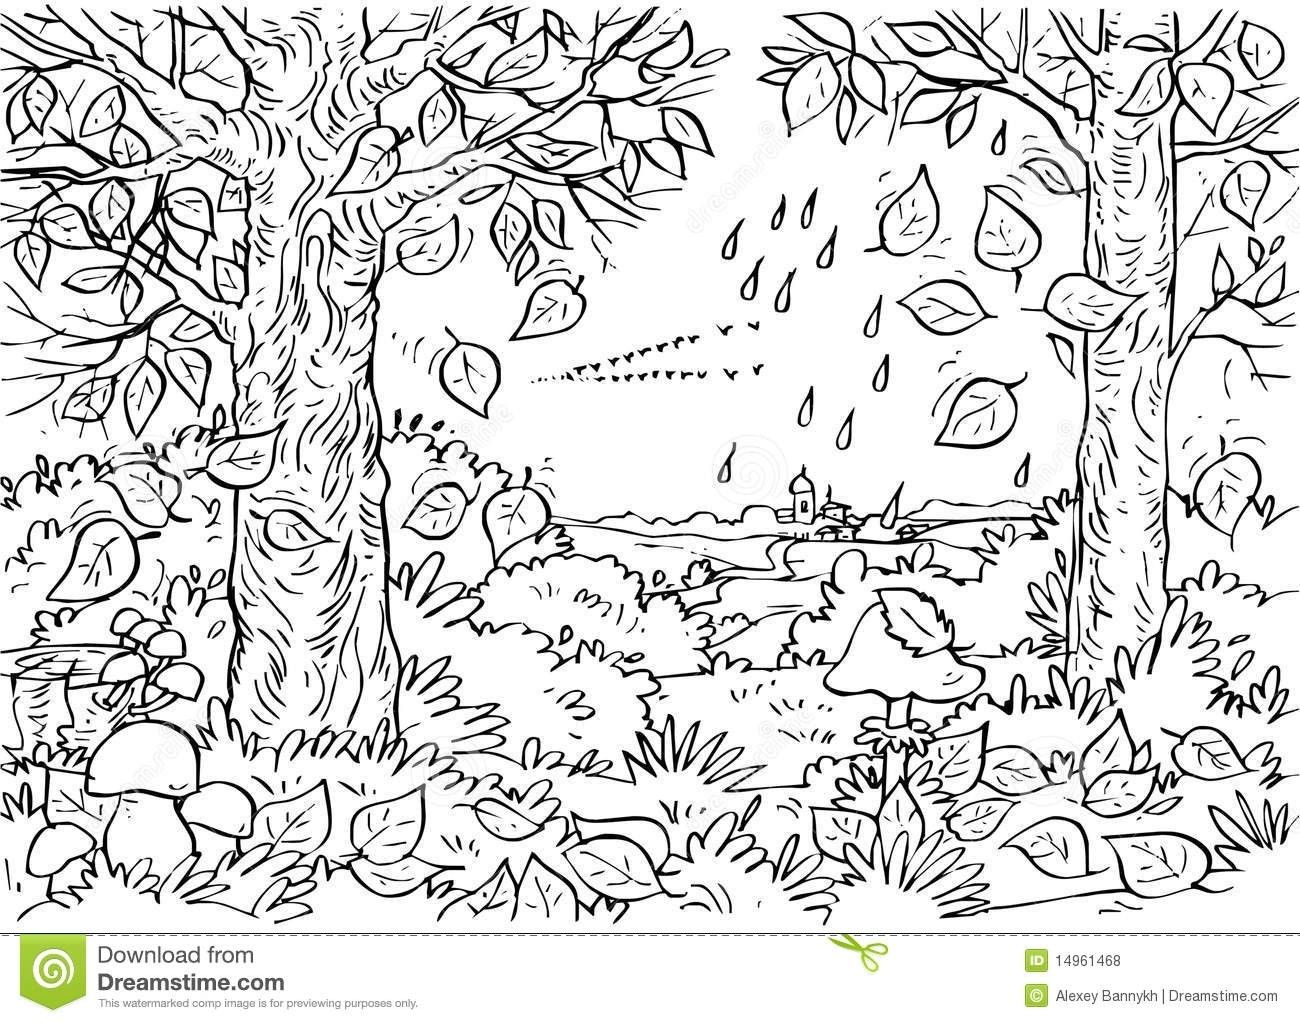 Awesome forest clipart.